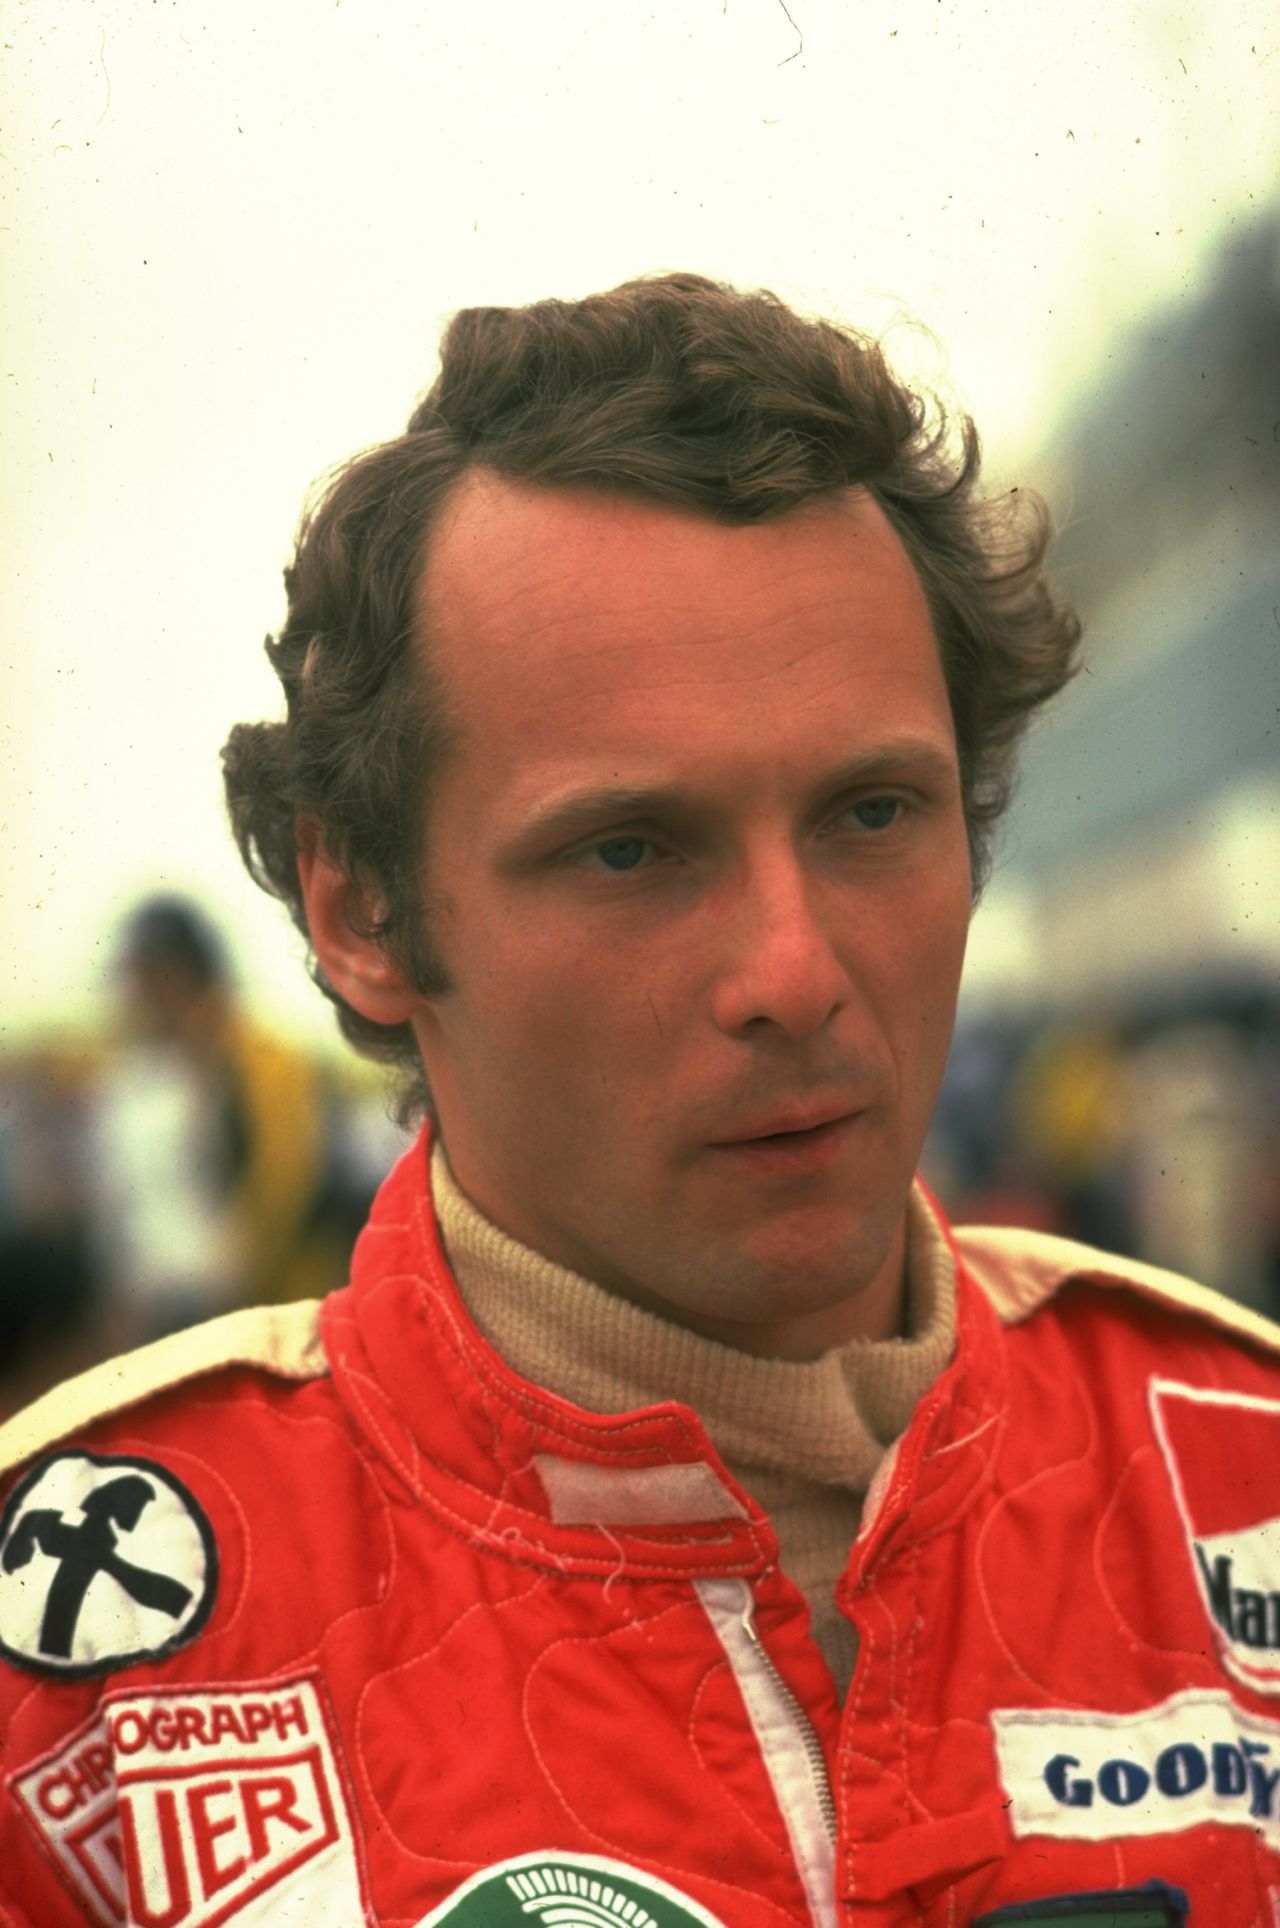 By contrast, Austrian Lauda had a meticulous nature on and off the racetrack. The clash of personalities made for a compelling rivalry on and off the track during the 1976 season.      